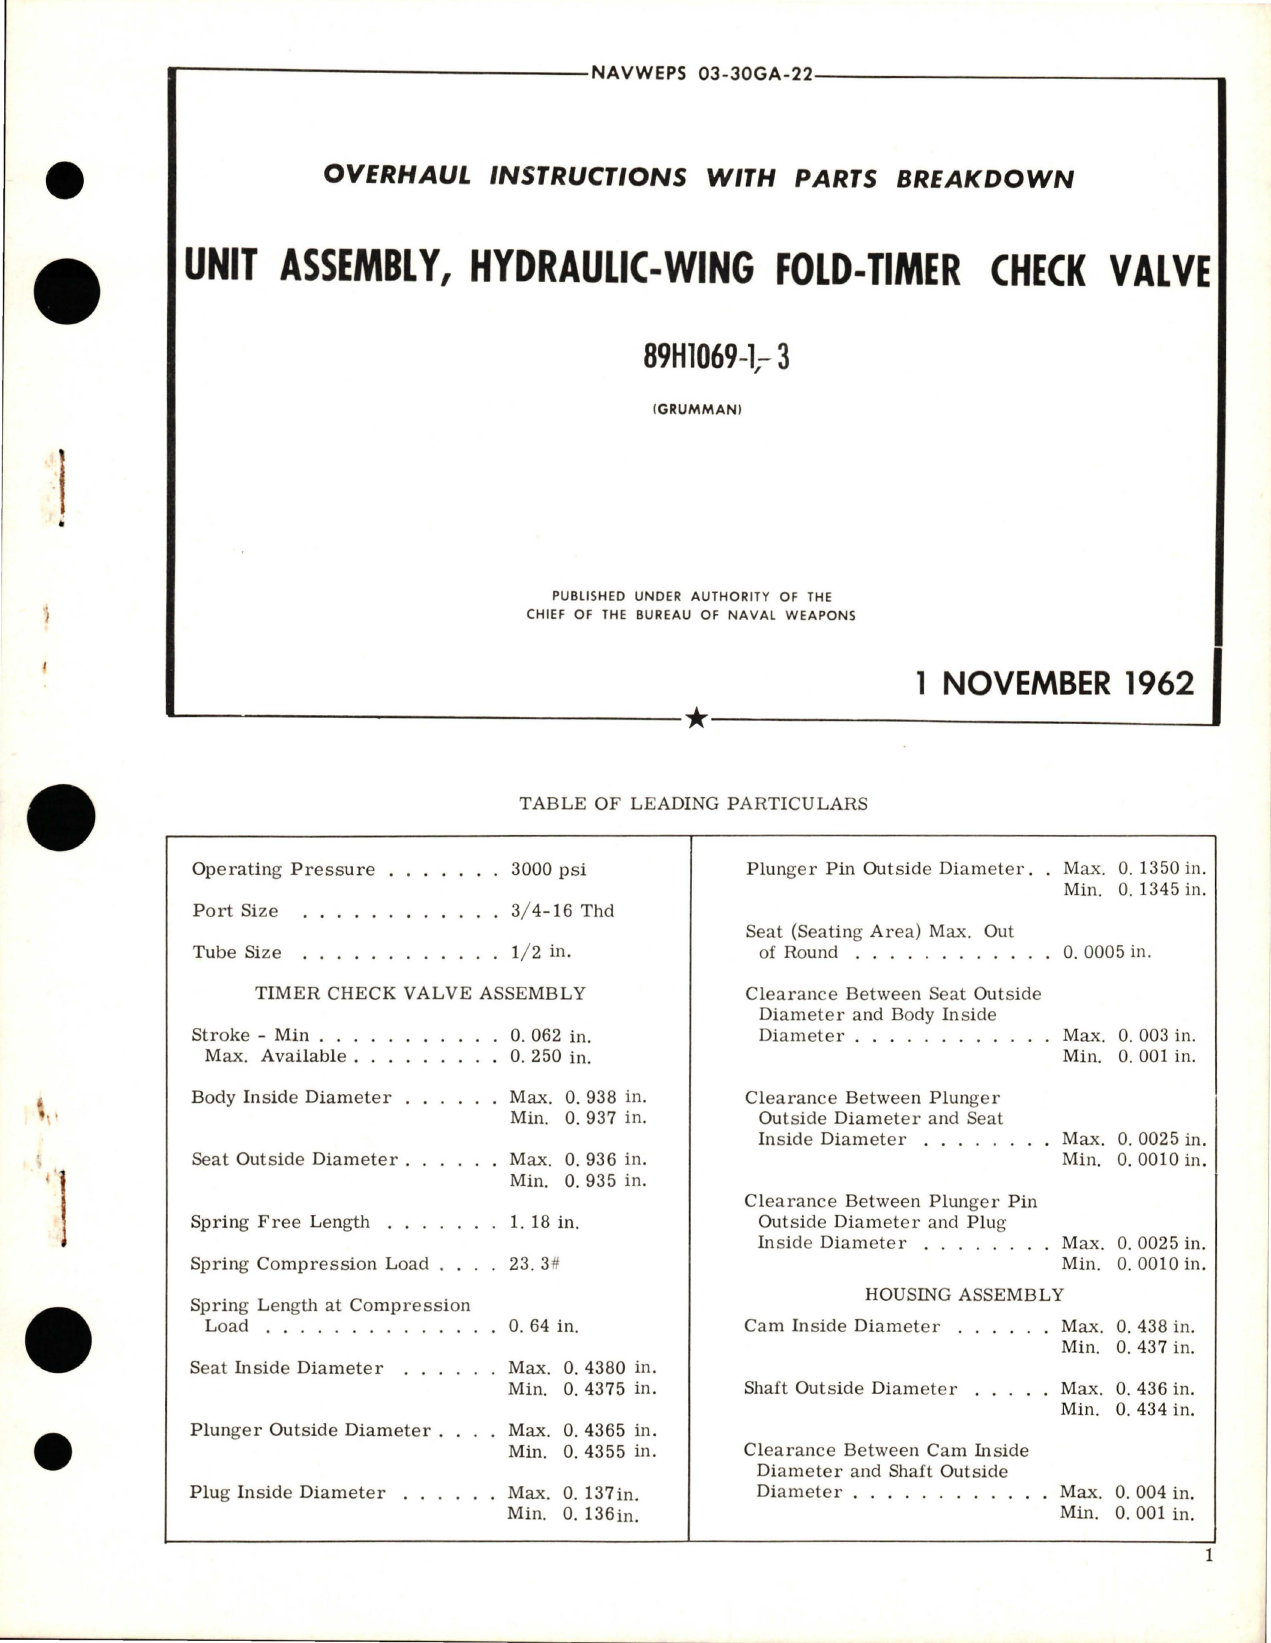 Sample page 1 from AirCorps Library document: Overhaul Instructions with Parts Breakdown for Hydraulic Wing Fold-Timer Check Valve Unit Assembly - 89H1069-1 and 89H1069-3